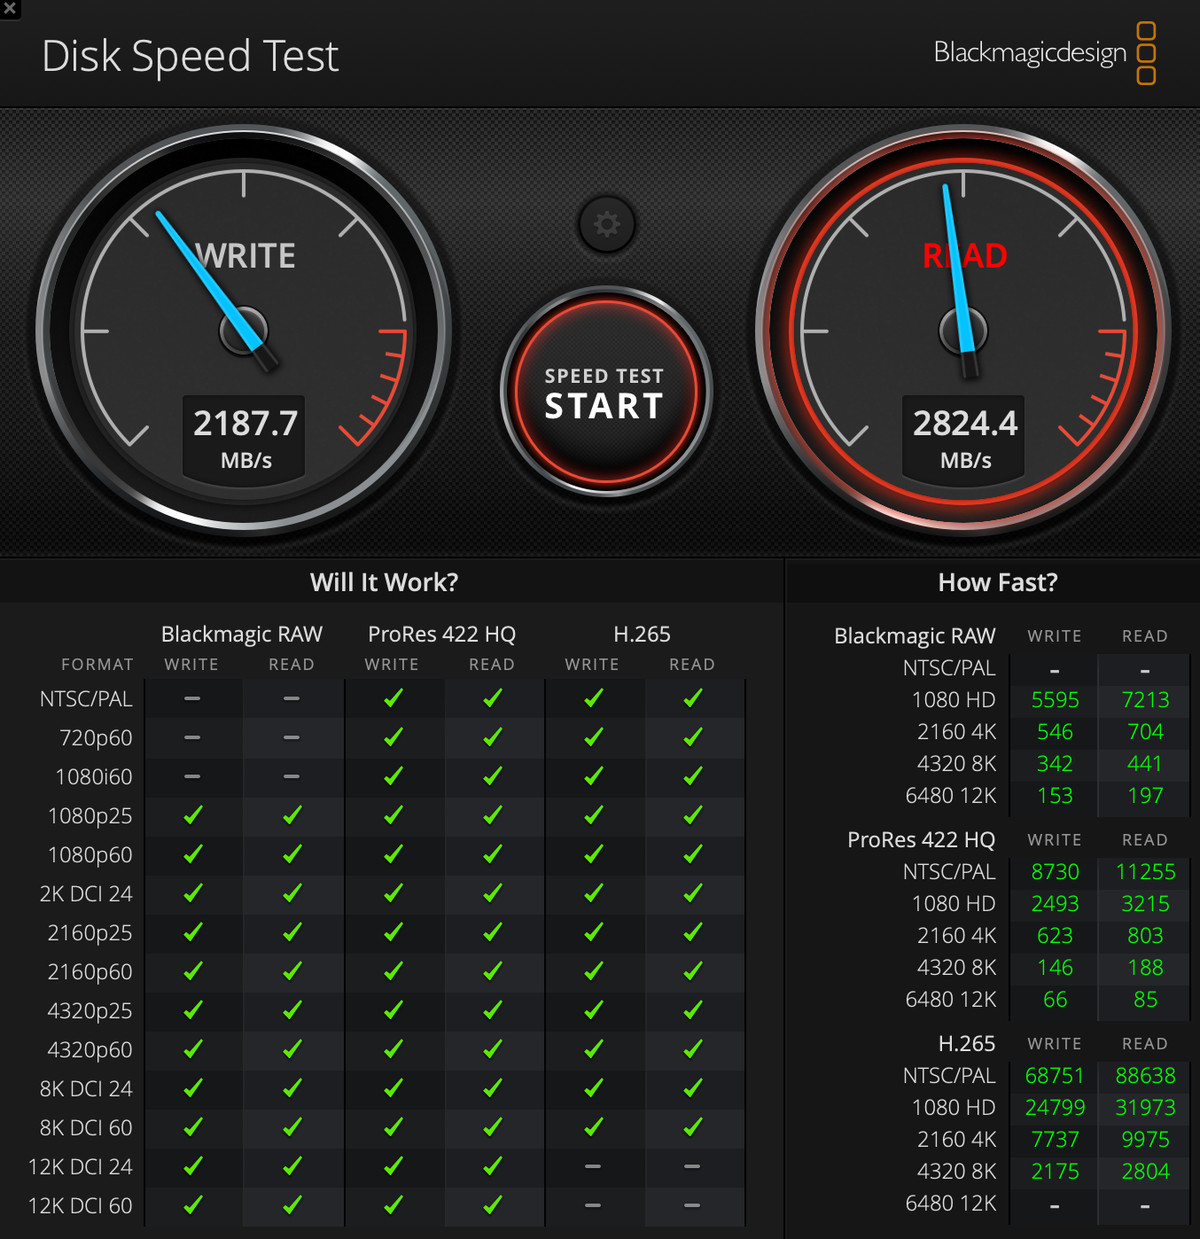 A screenshot of the Blackmagic Disk Speed ​​Test showing results of 2187.7 for Write and 2824.4 for Read.